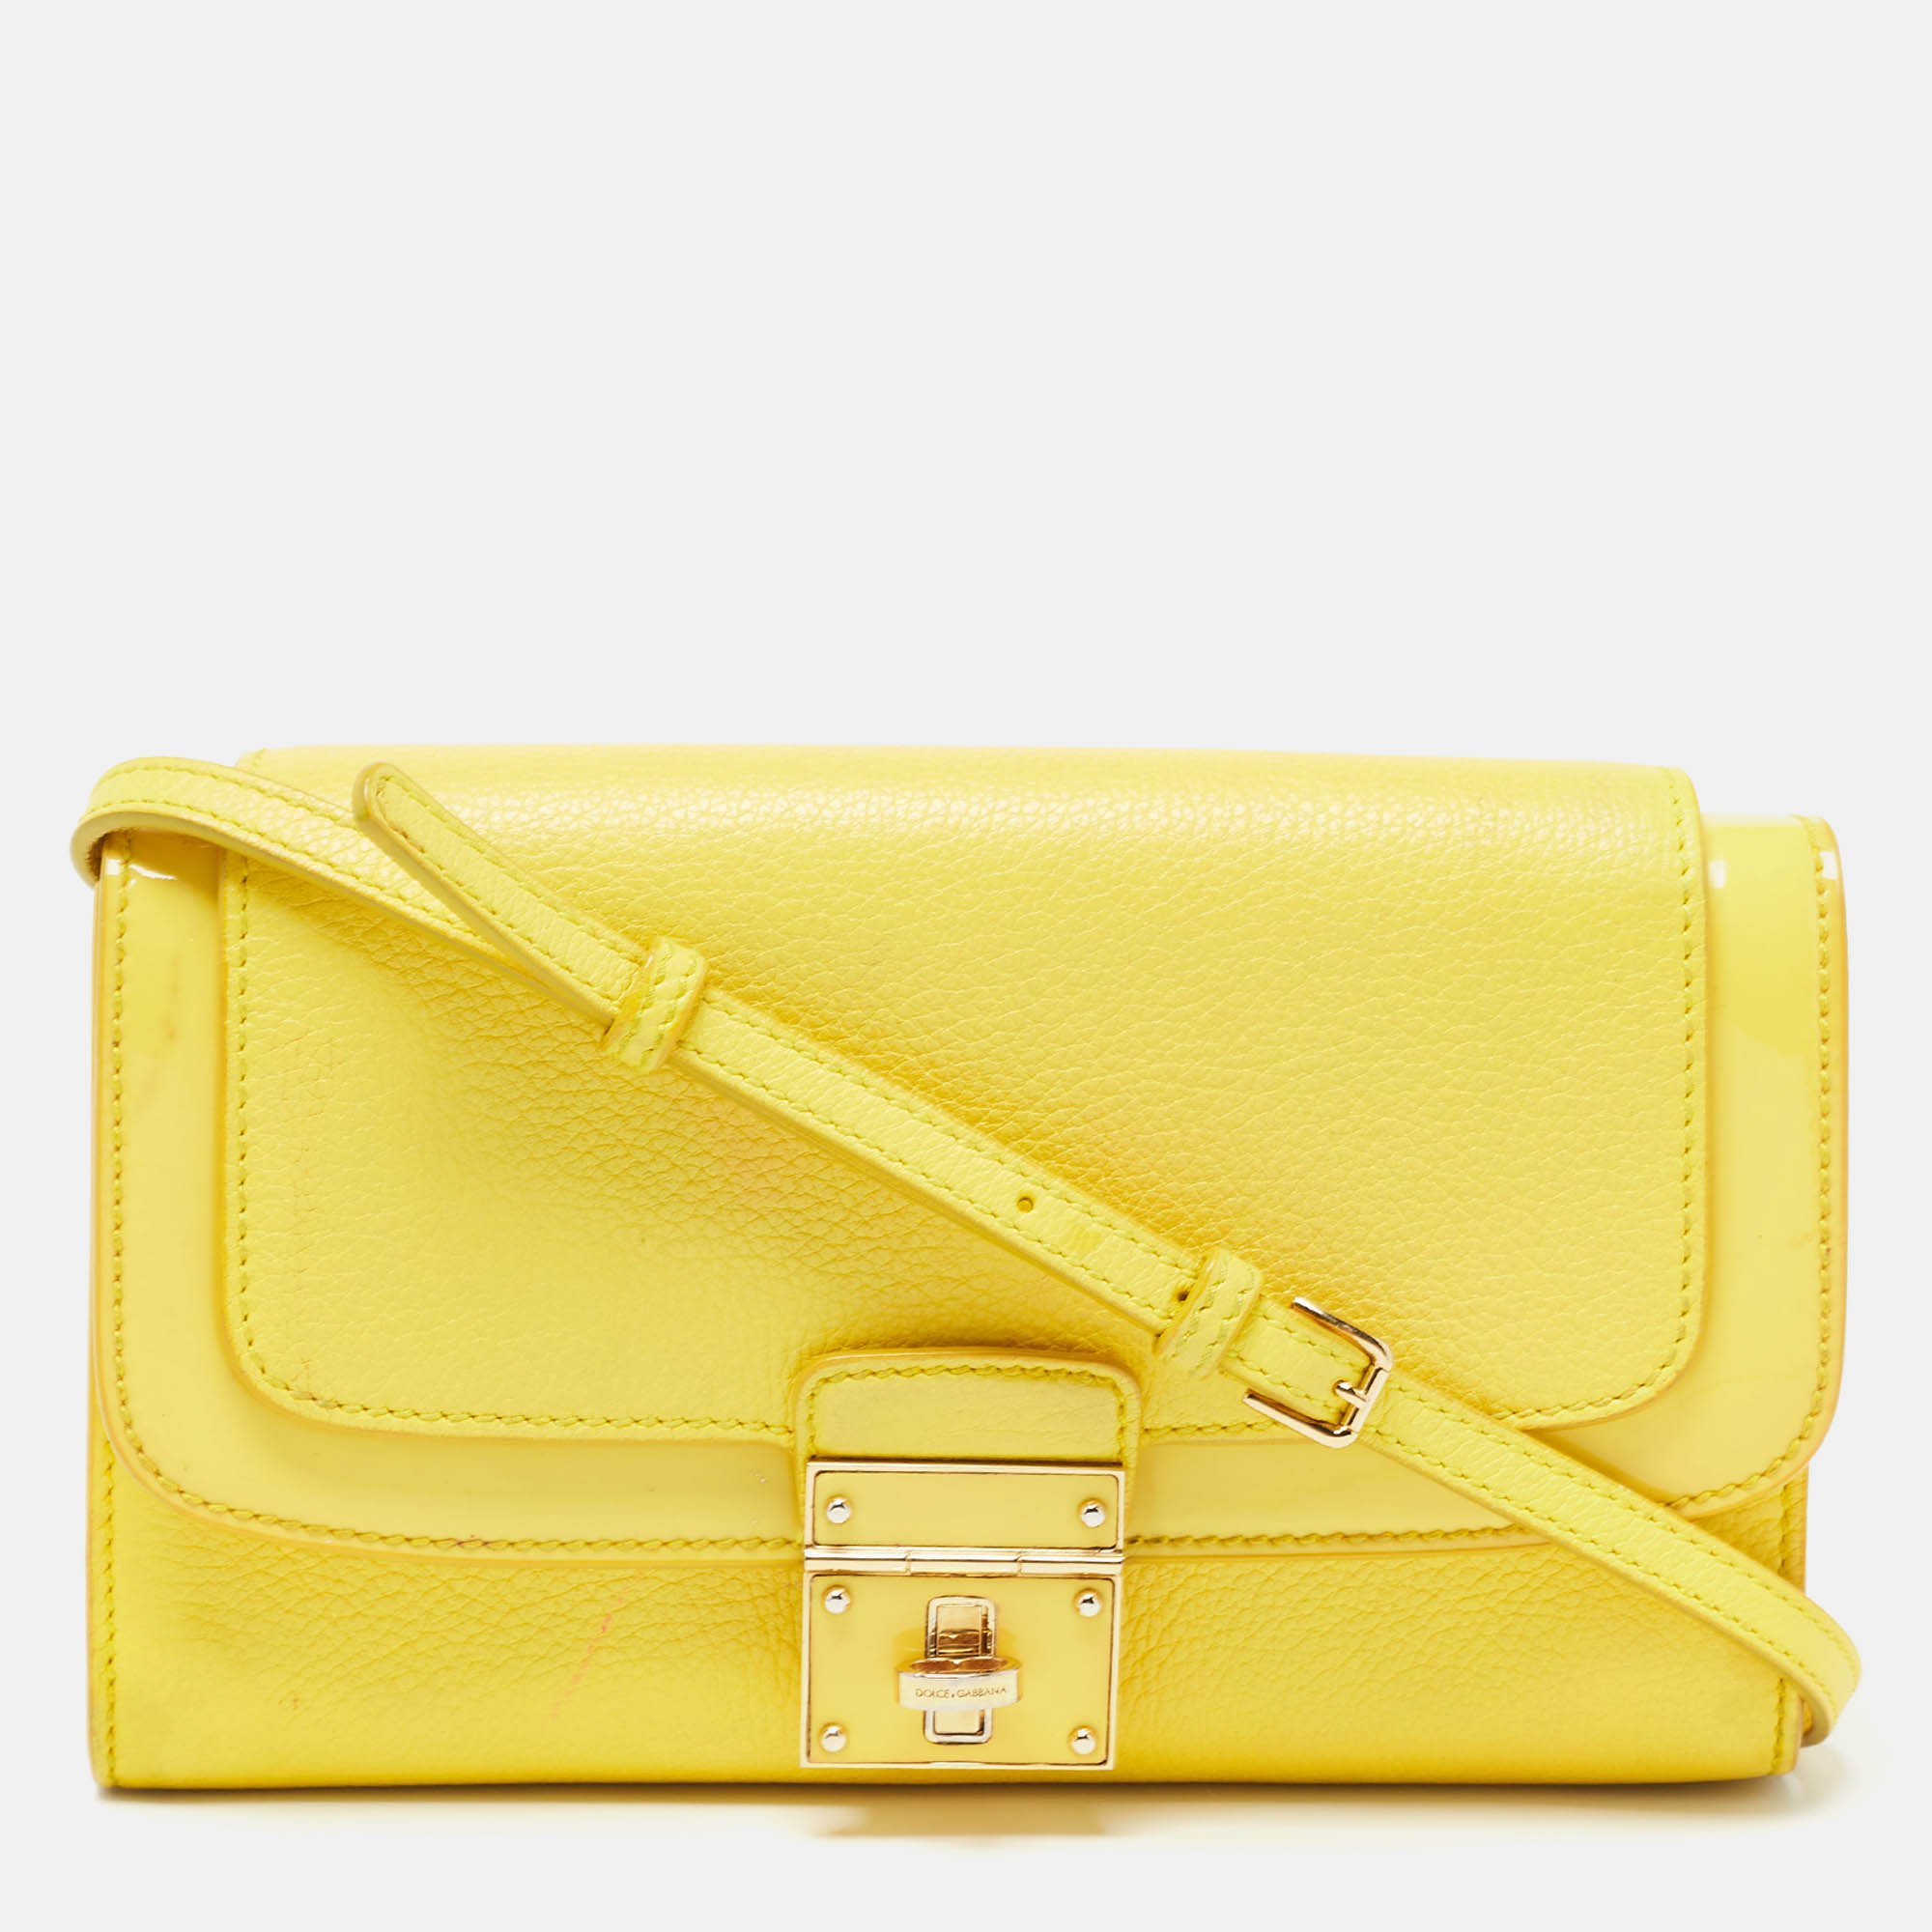 

Dolce & Gabbana Yellow Leather Turnlock Flap Shoulder Bag